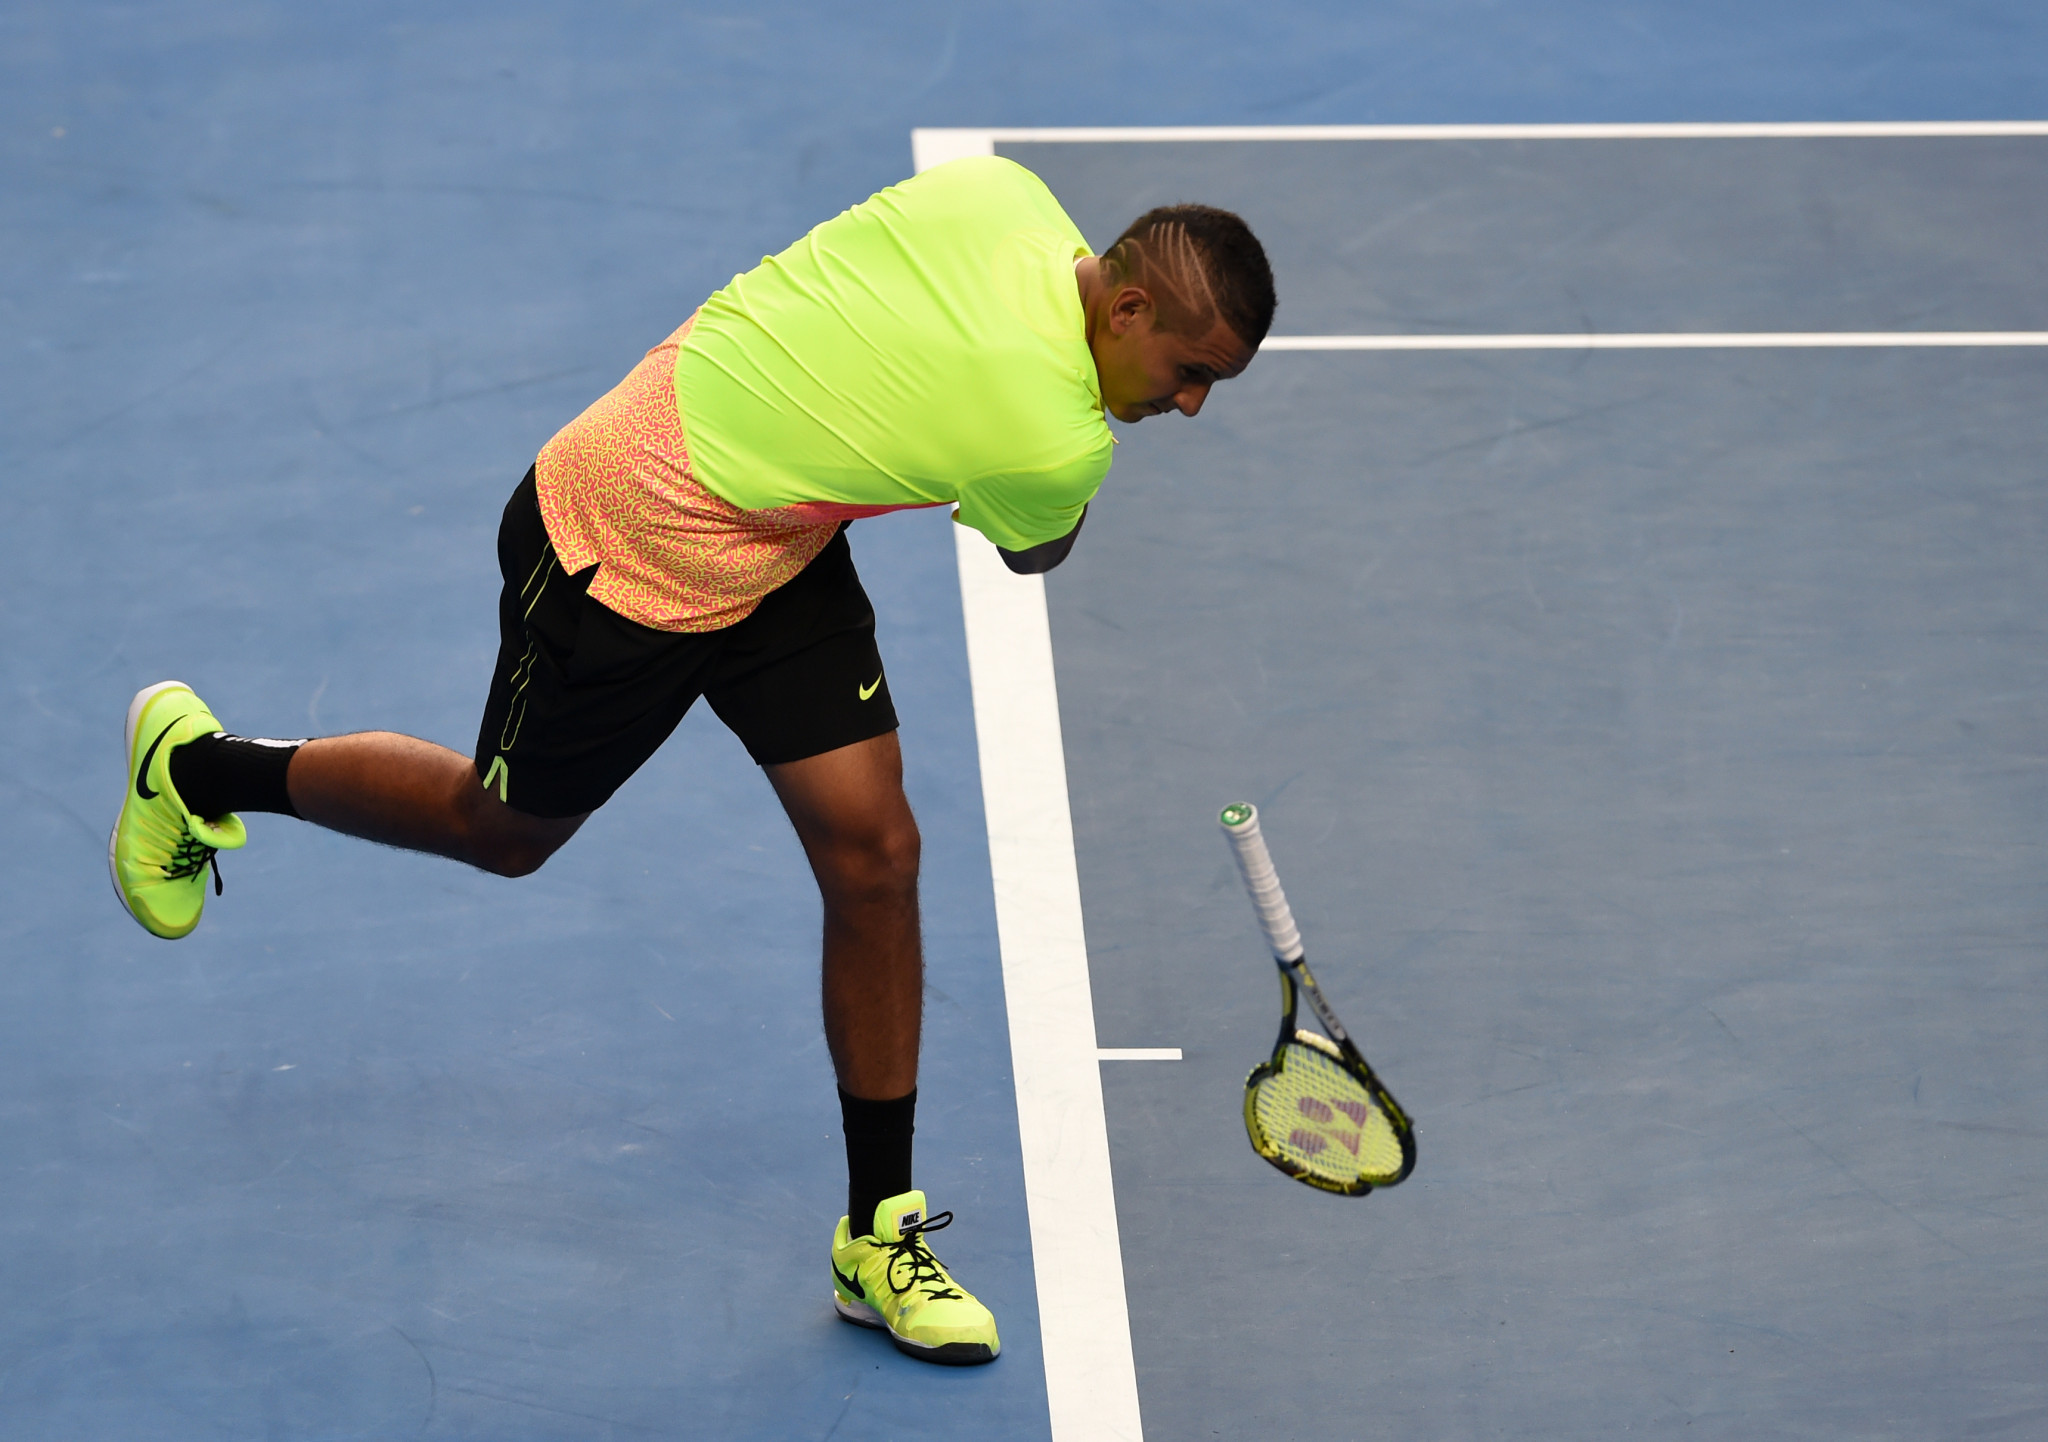 Nick Kyrgios has caused controversy during his career, leading to a row with the AOC which saw the player withdraw from the Rio 2016 Olympics ©Getty Images